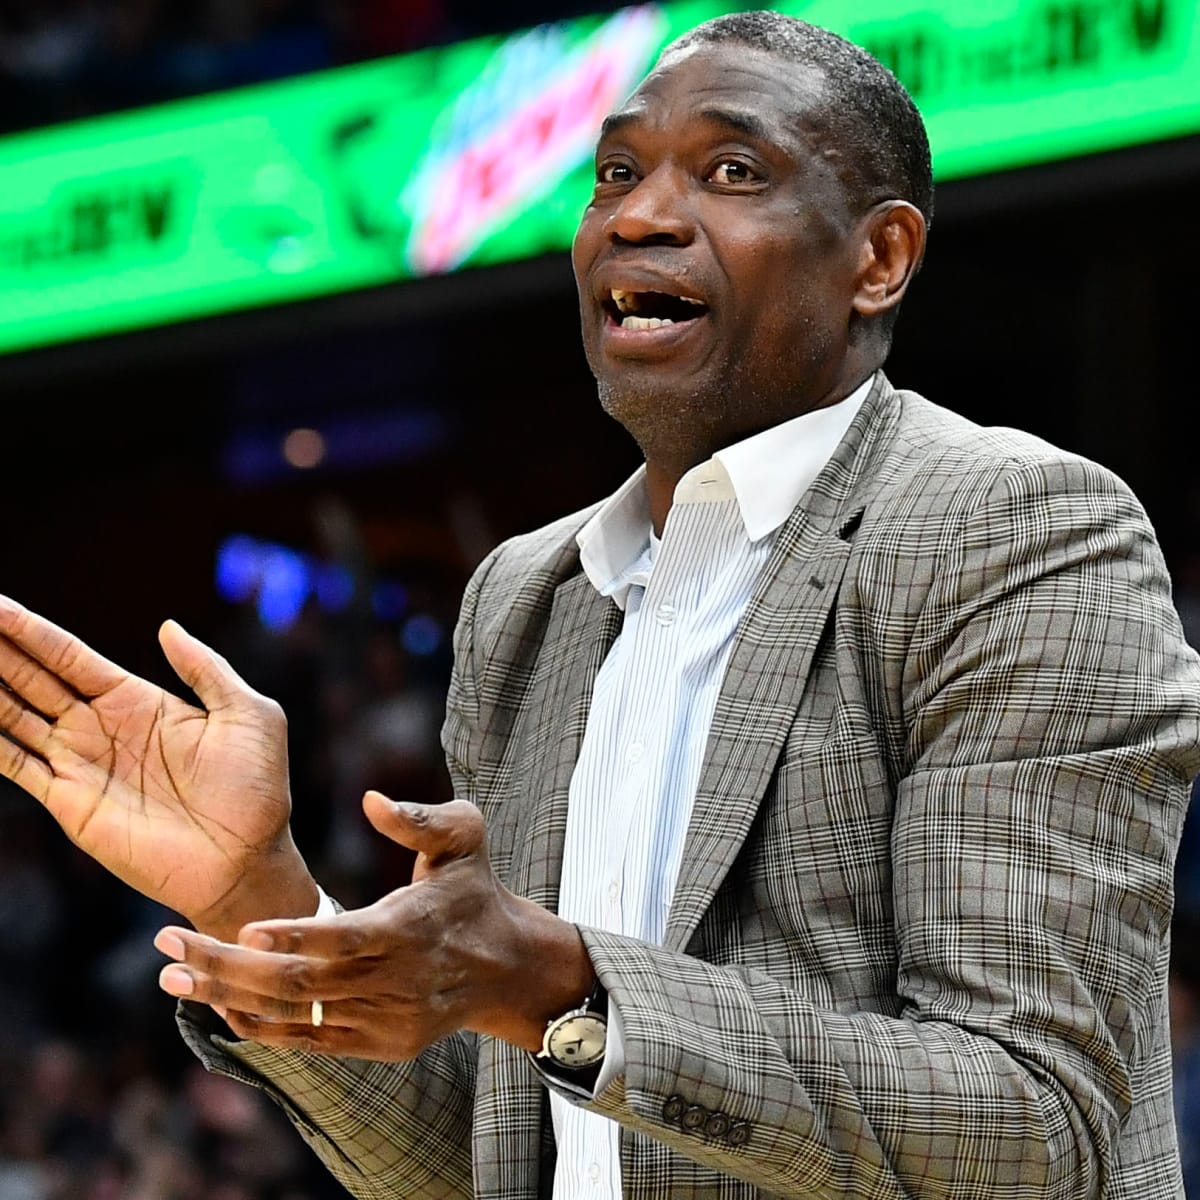 Dikembe Mutombo Calls Out Sixers Star: 'I'm Master of Ceremonies